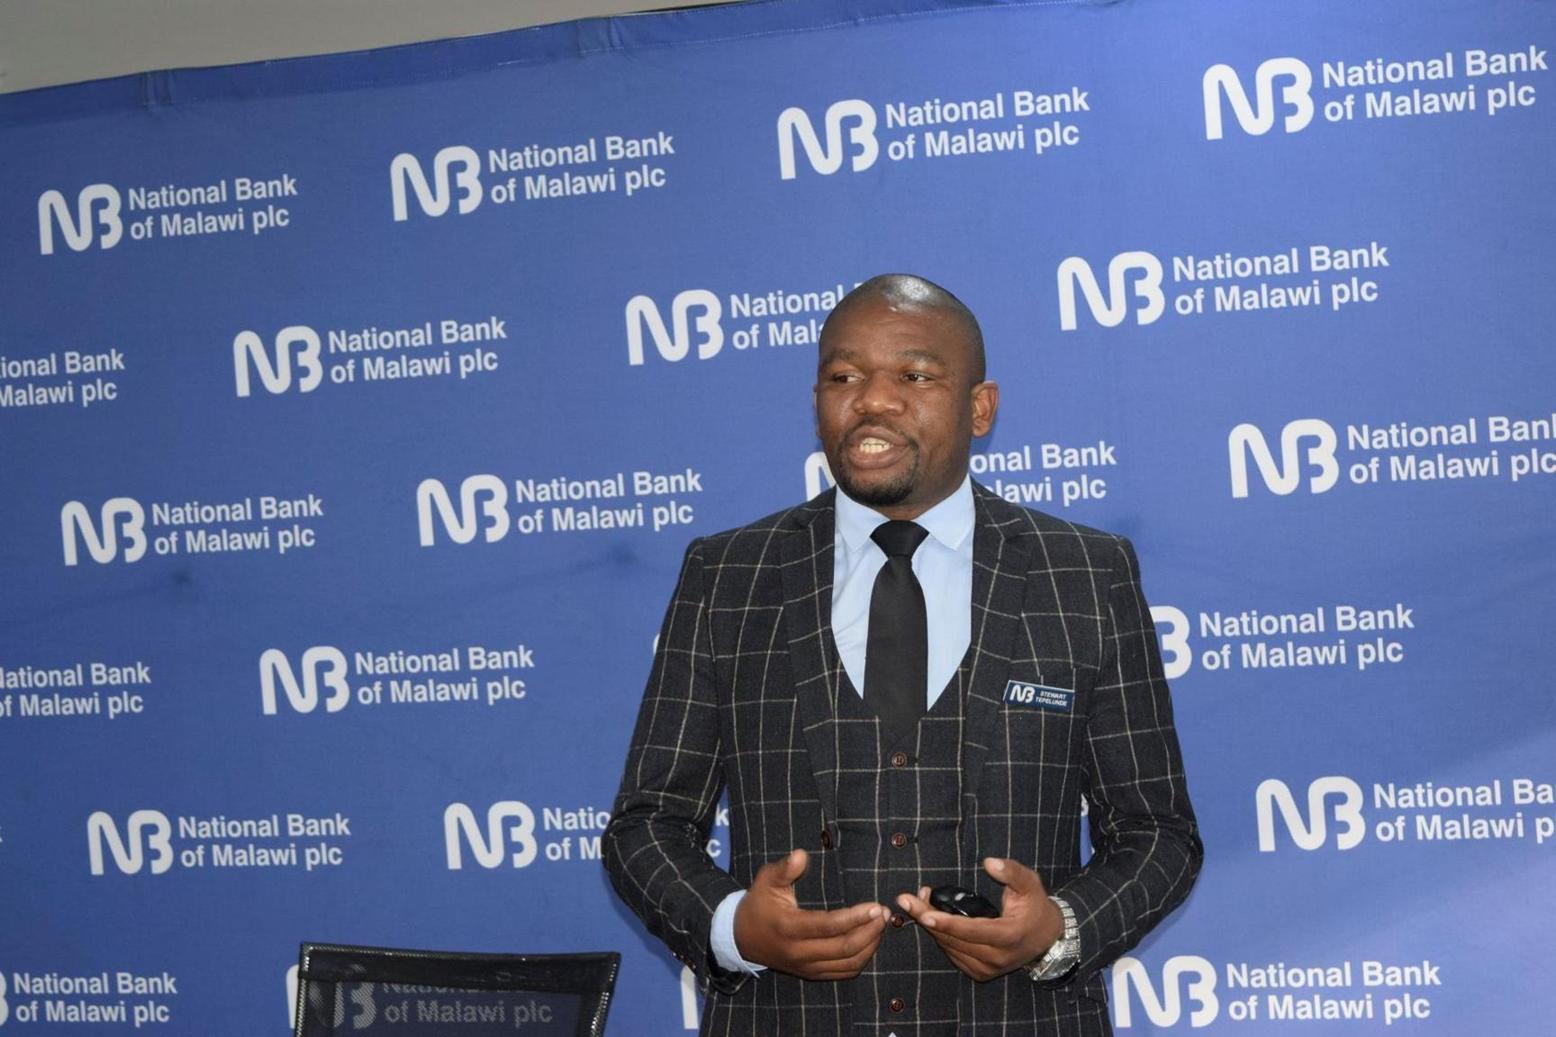 NBM plc partners with Mastercard to issue Multi-currency Cash Passport cards